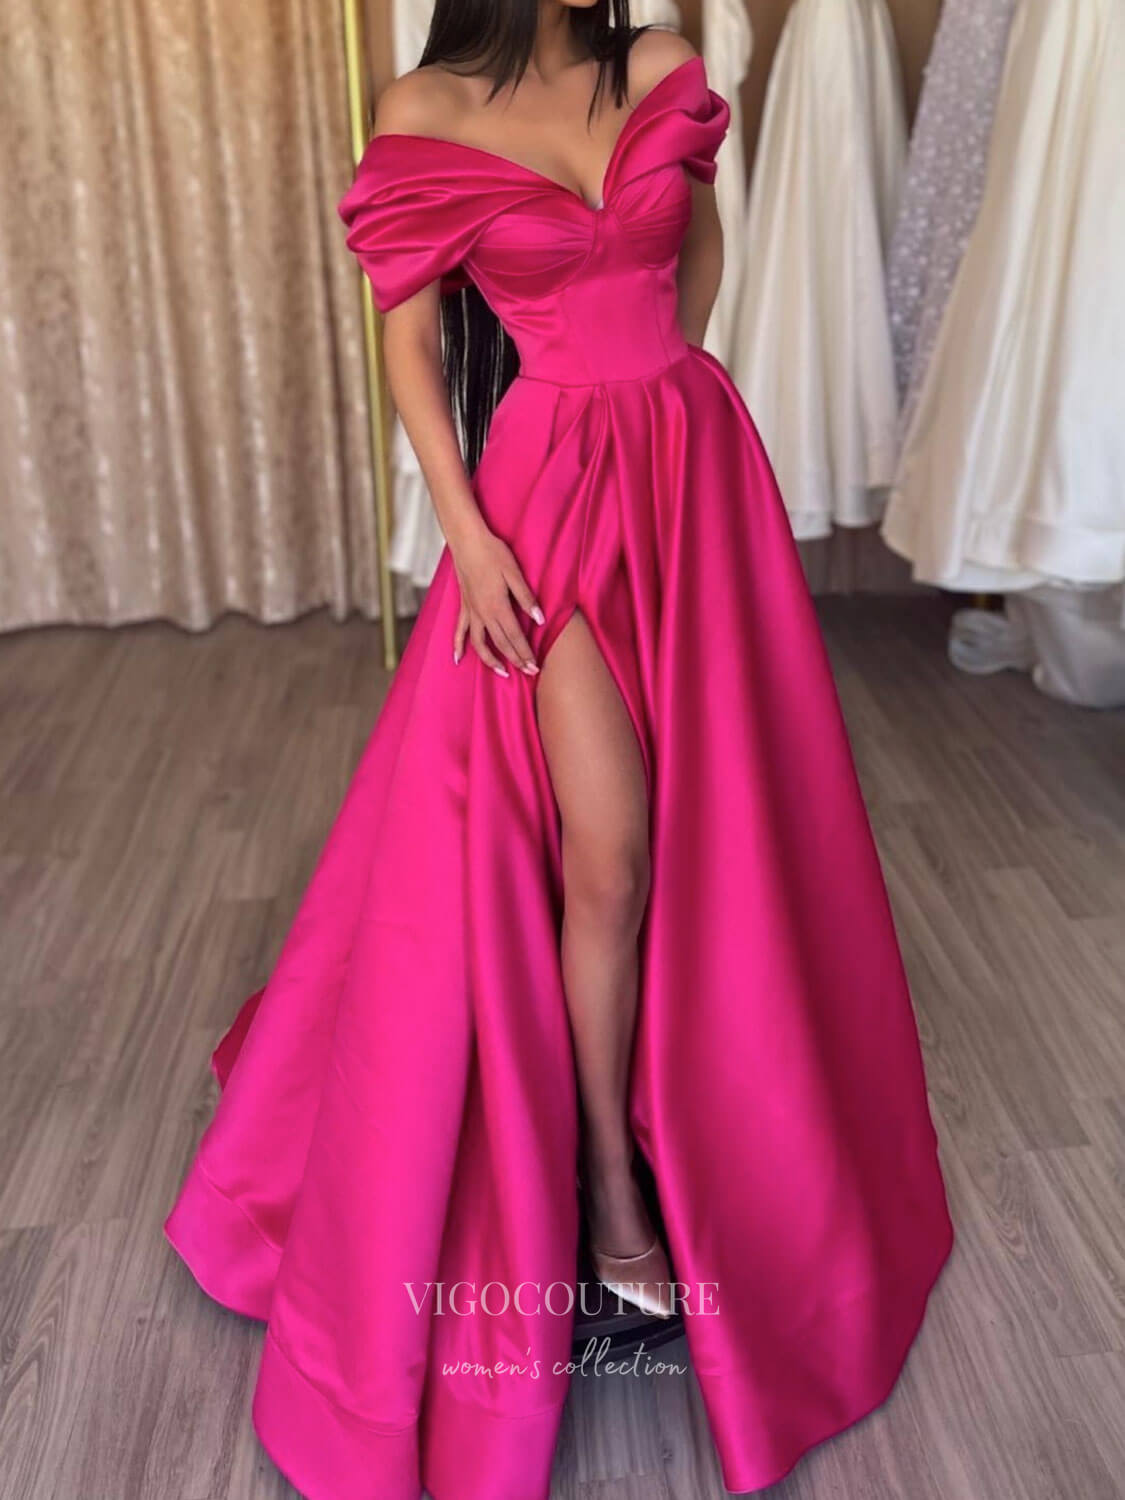 vigocouture-Pink Off the Shoulder Prom Dresses With Slit Satin A-Line Evening Dress 21773-Prom Dresses-vigocouture-Pink-US2-